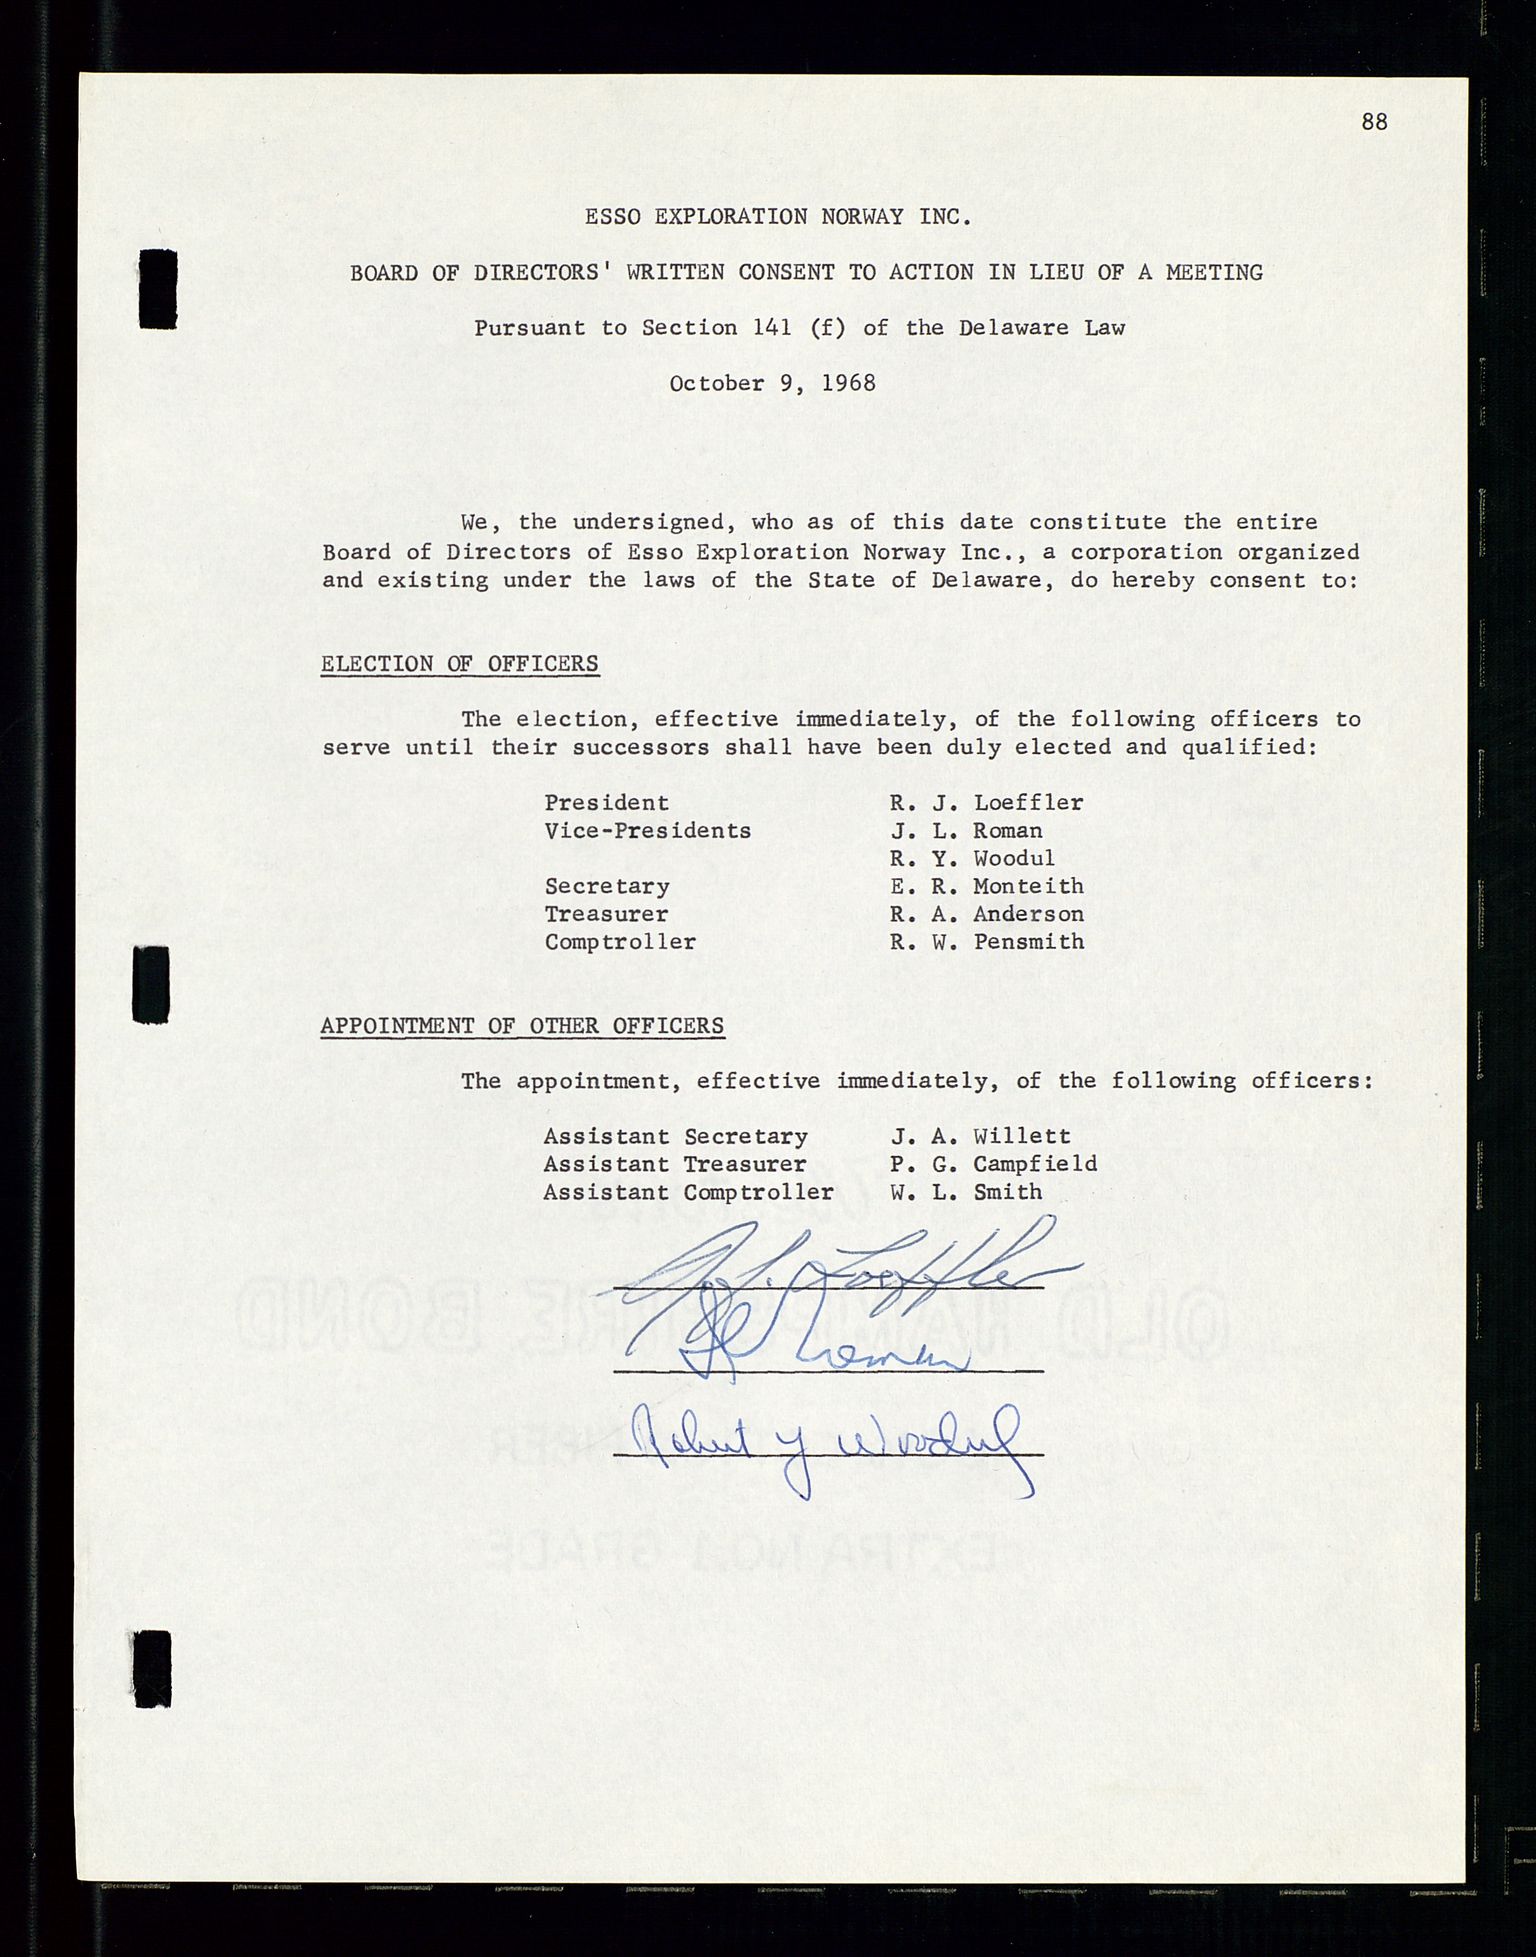 Pa 1512 - Esso Exploration and Production Norway Inc., SAST/A-101917/A/Aa/L0001/0001: Styredokumenter / Corporate records, By-Laws, Board meeting minutes, Incorporations, 1965-1975, p. 88